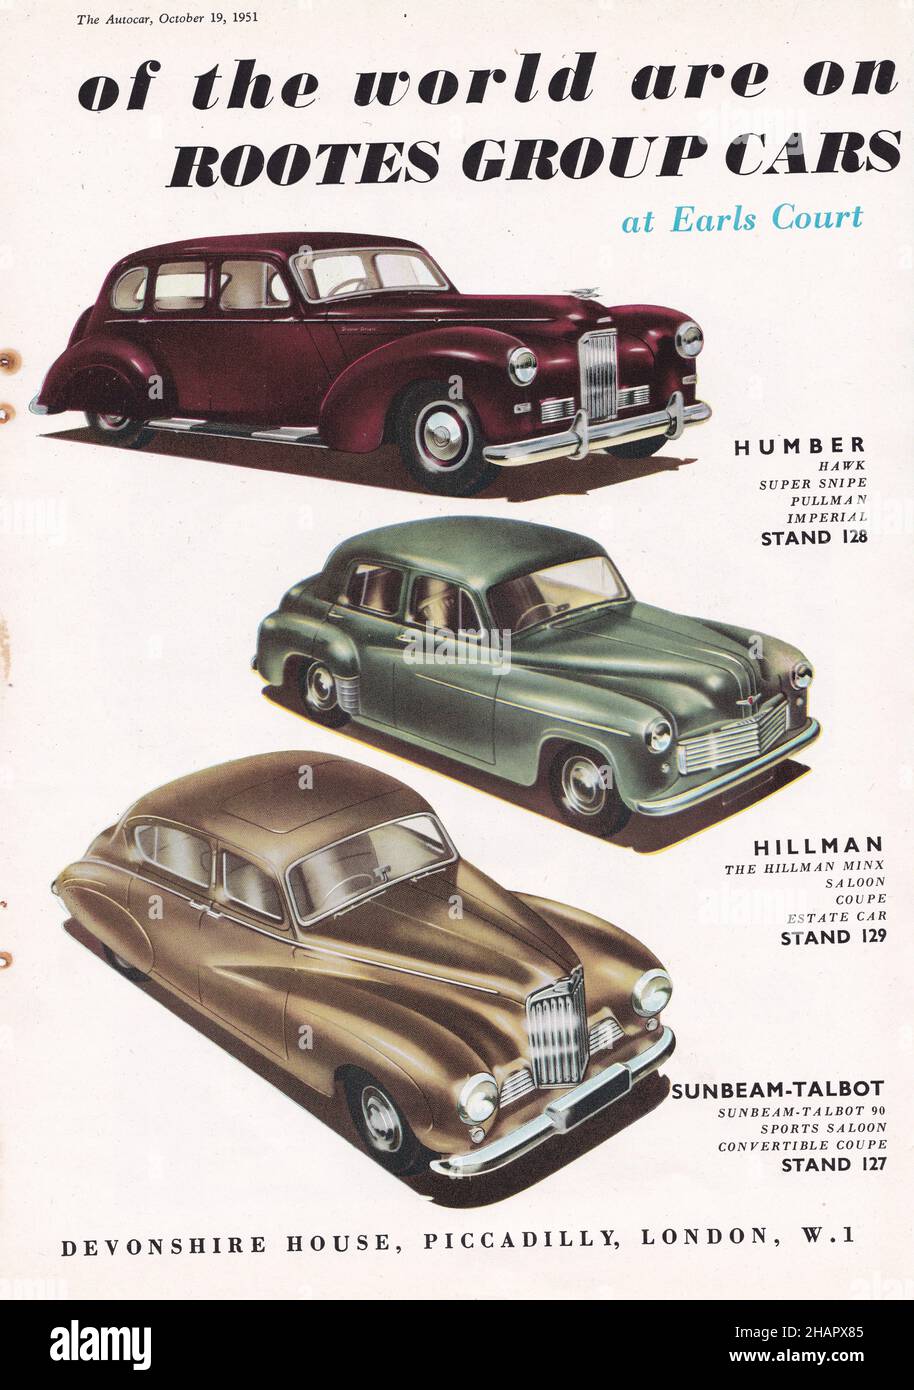 Vintage adverts in The Autocar, October 1951 Motorshow Earls Court - Rootes Group Cars. Stock Photo